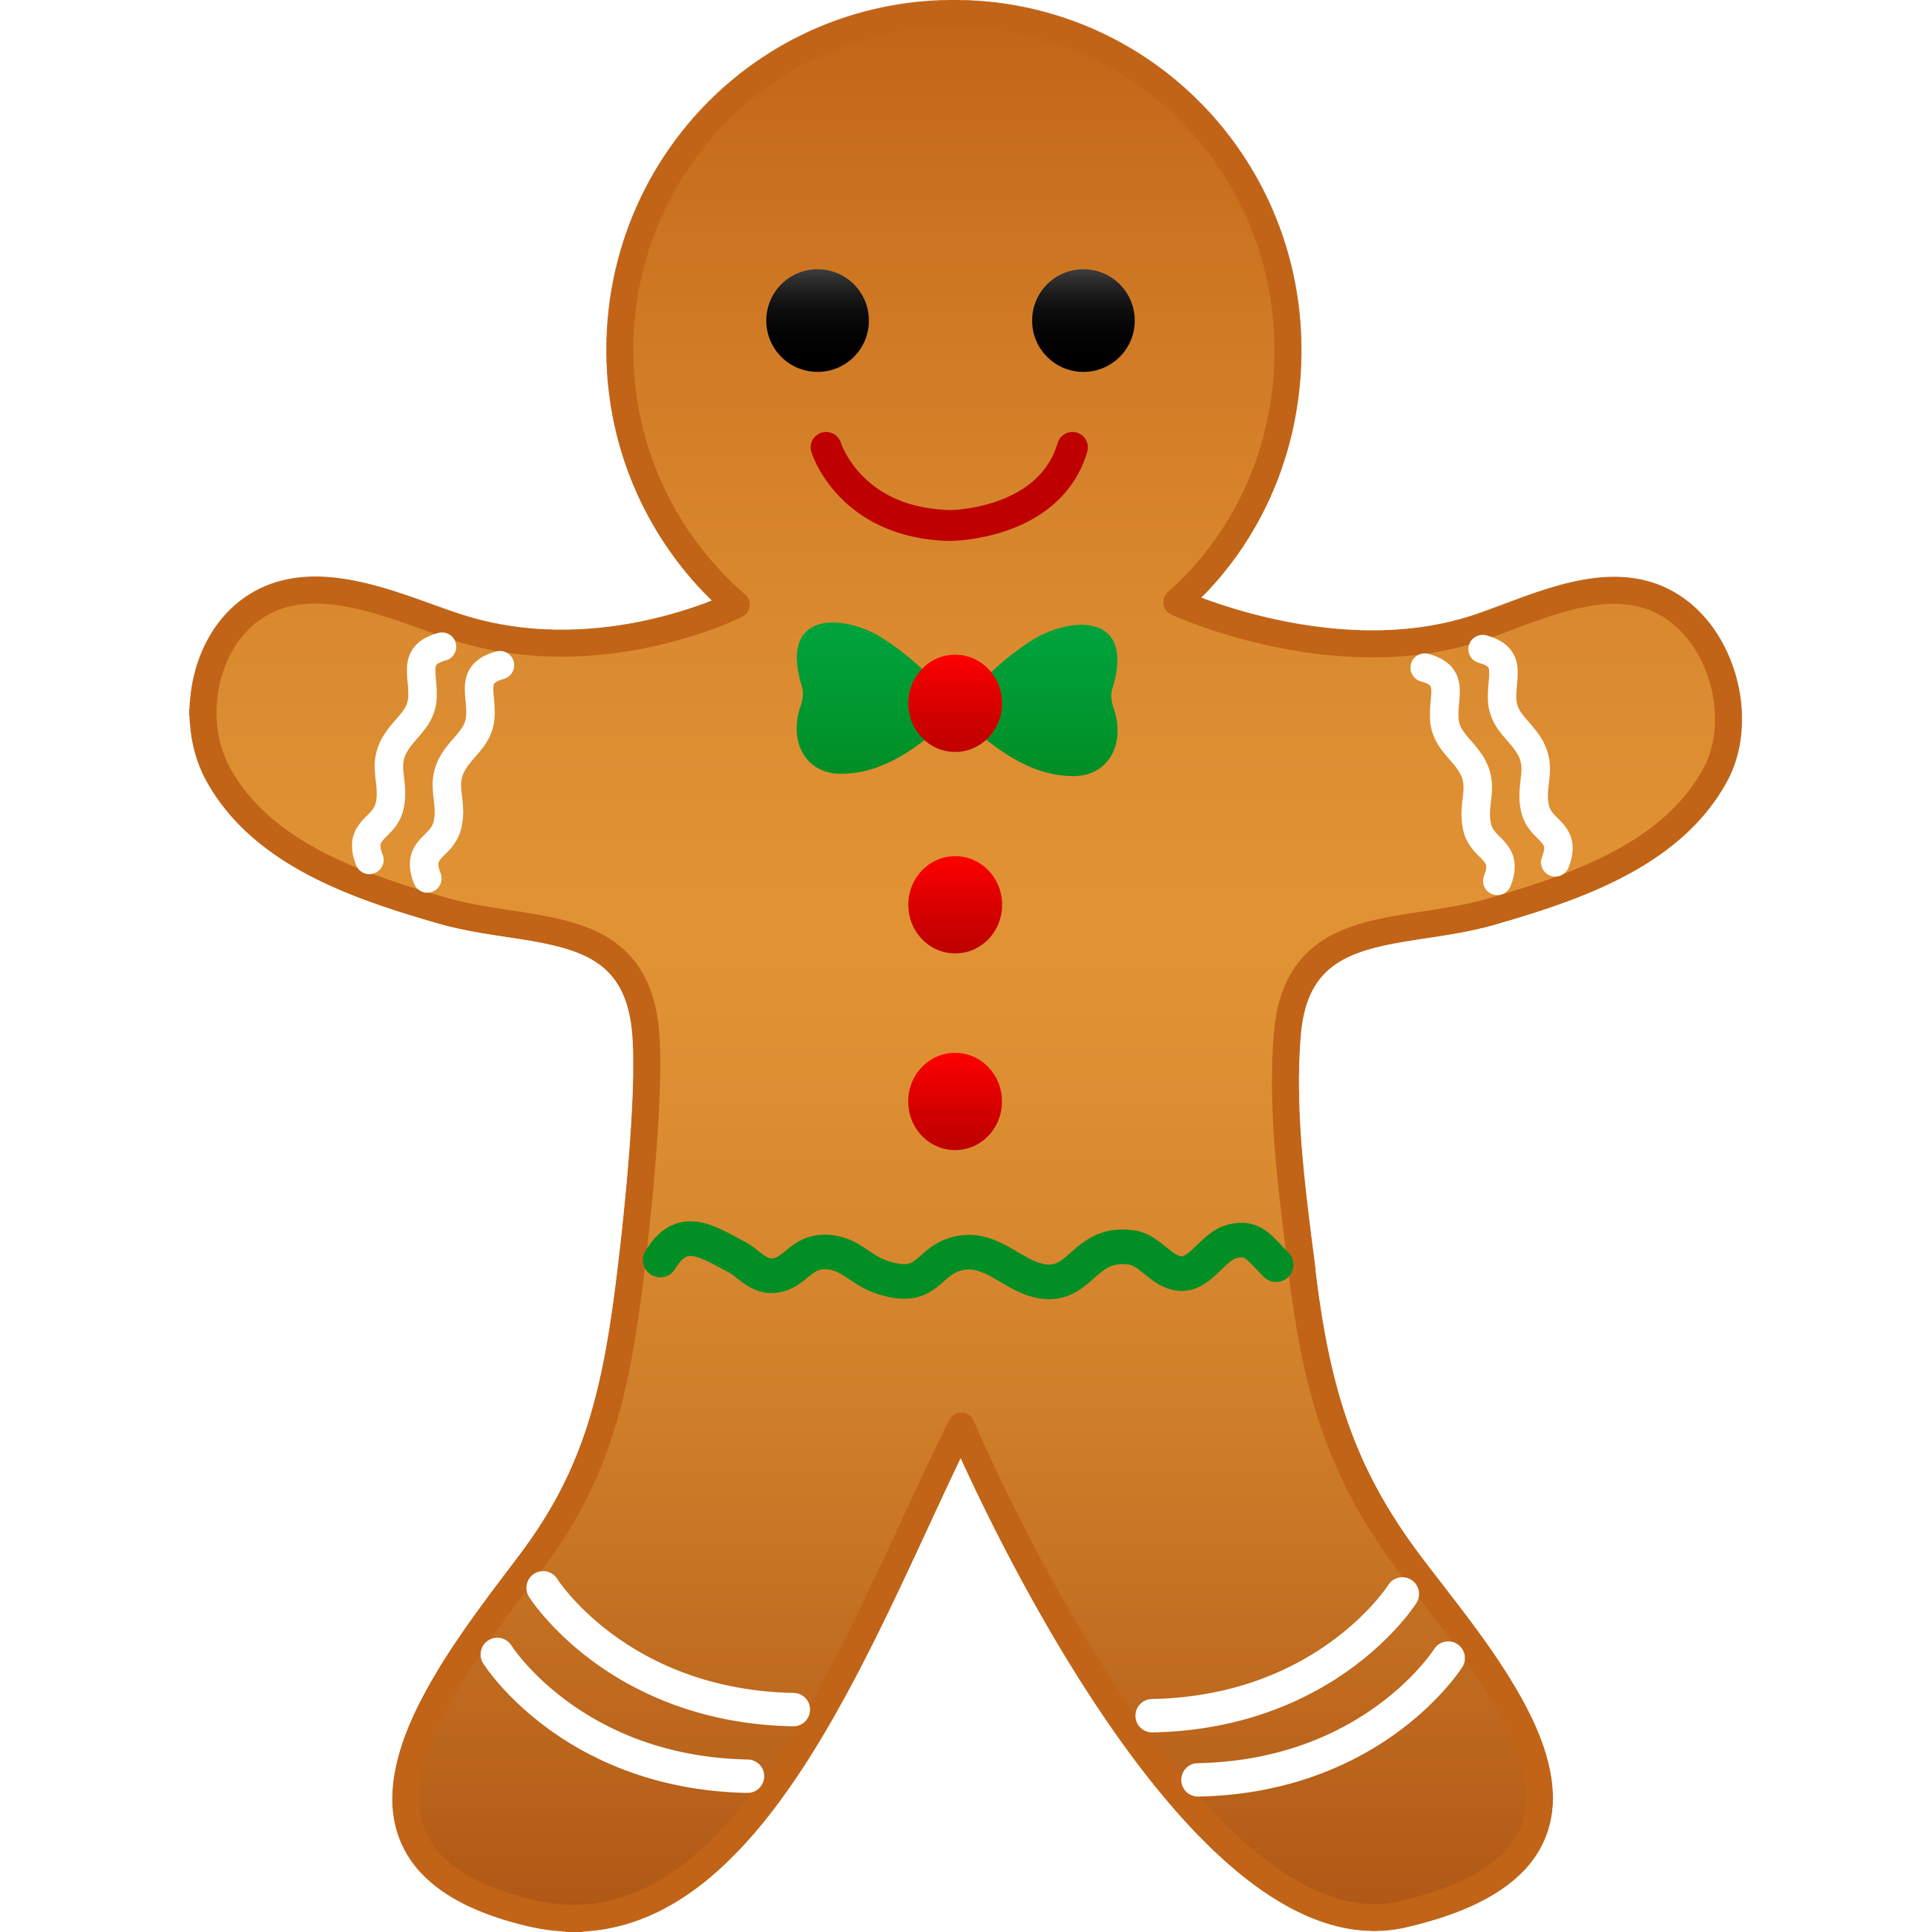 The Gingerbread Man Biscuits Clip art - gingerbread man fortnite png ...